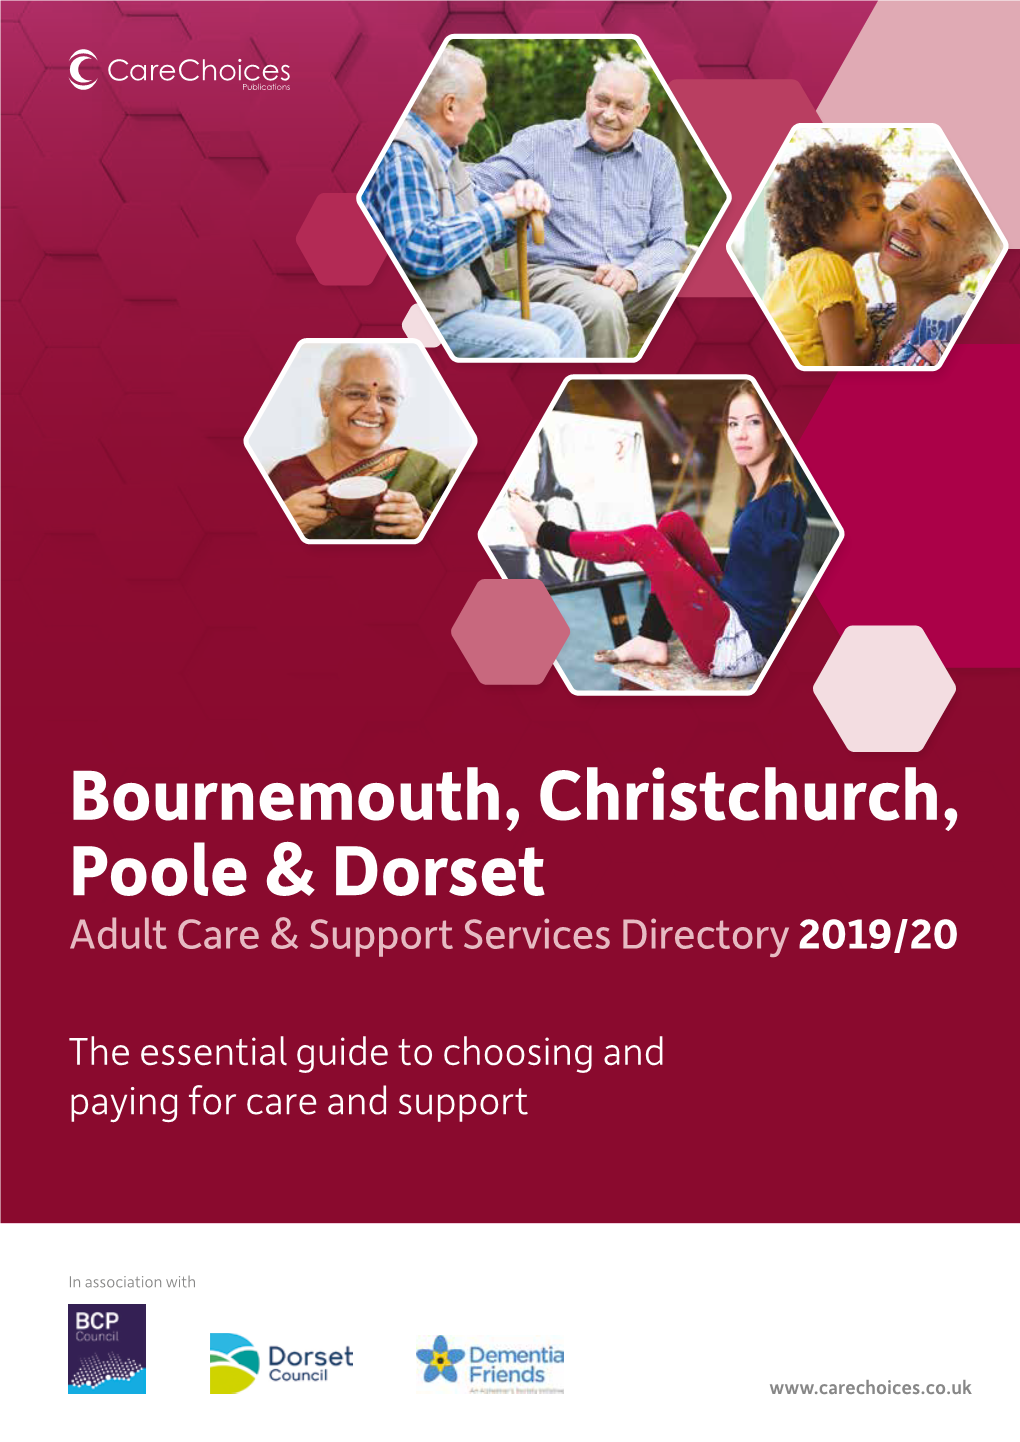 Adult Care Services Directory 2019-2020